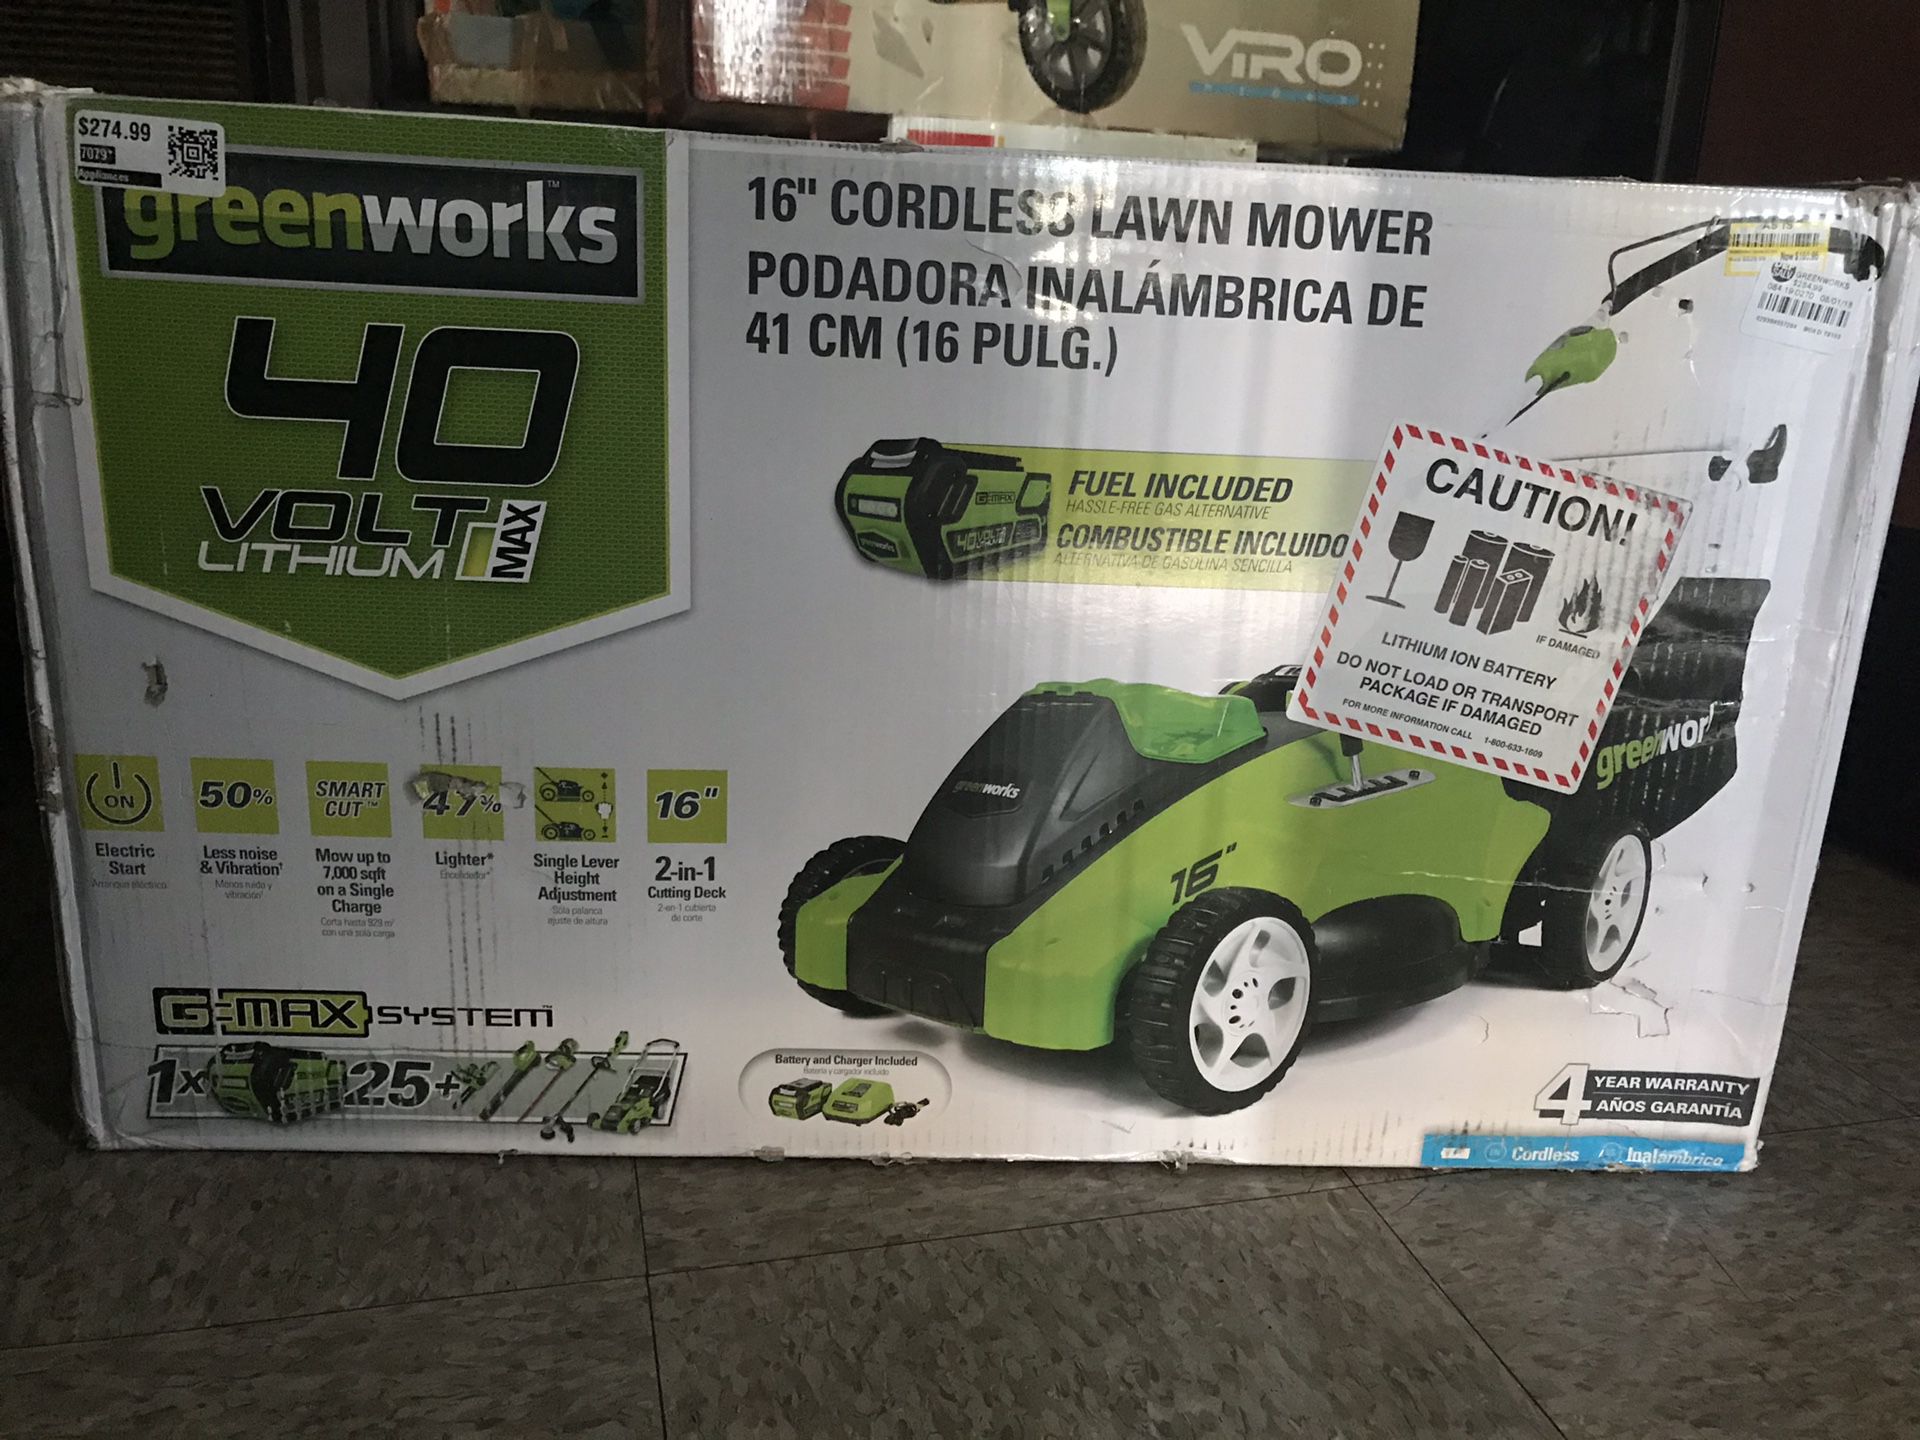 Green works 16” cordless lawn mower 40 volts lithium